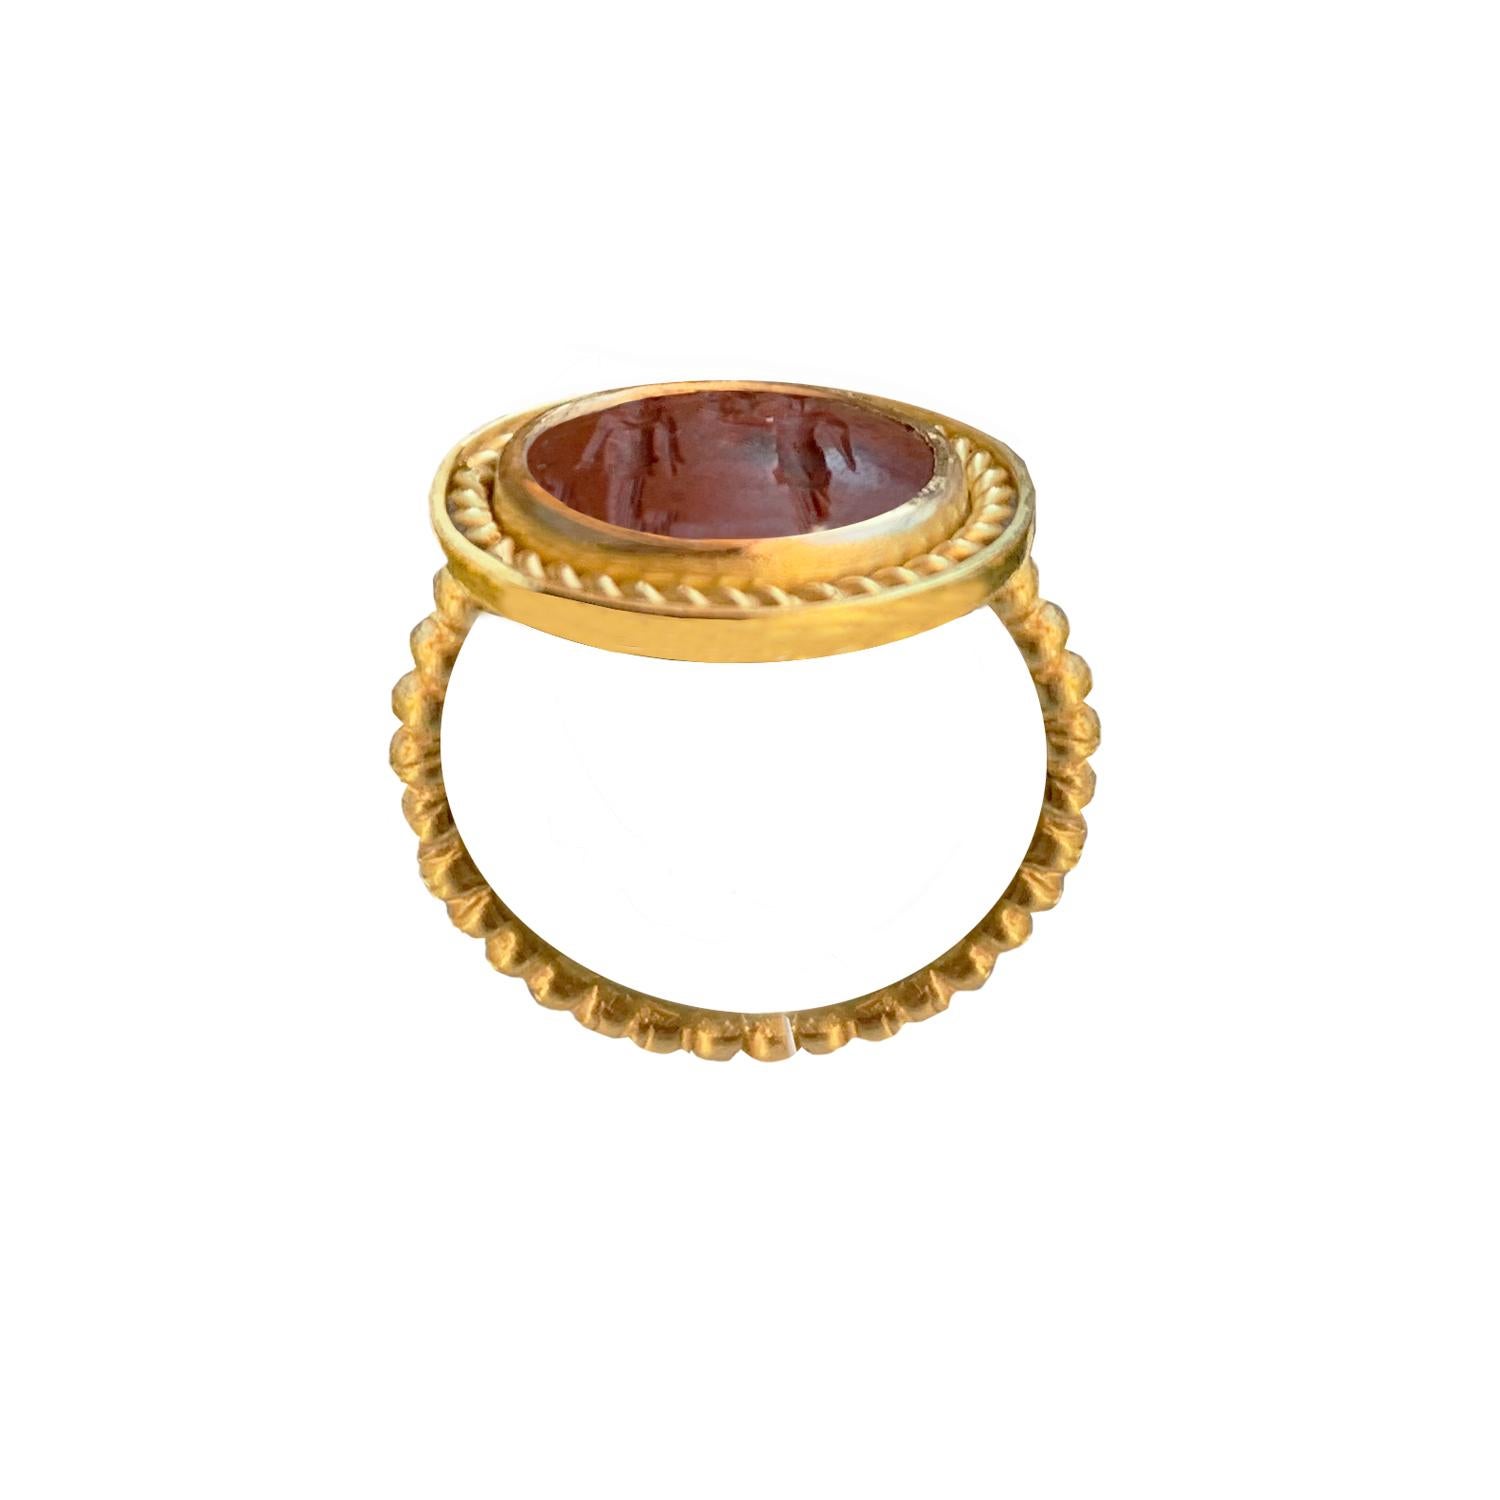 In this 18 Kr gold ring  there is an authentic roman intaglio on jasper, depicting Goddess Athena giving a winged Nike to an Emperor. 
Athena often given the epithet Pallas, is an ancient Greek goddess associated with wisdom, handicraft, and warfare